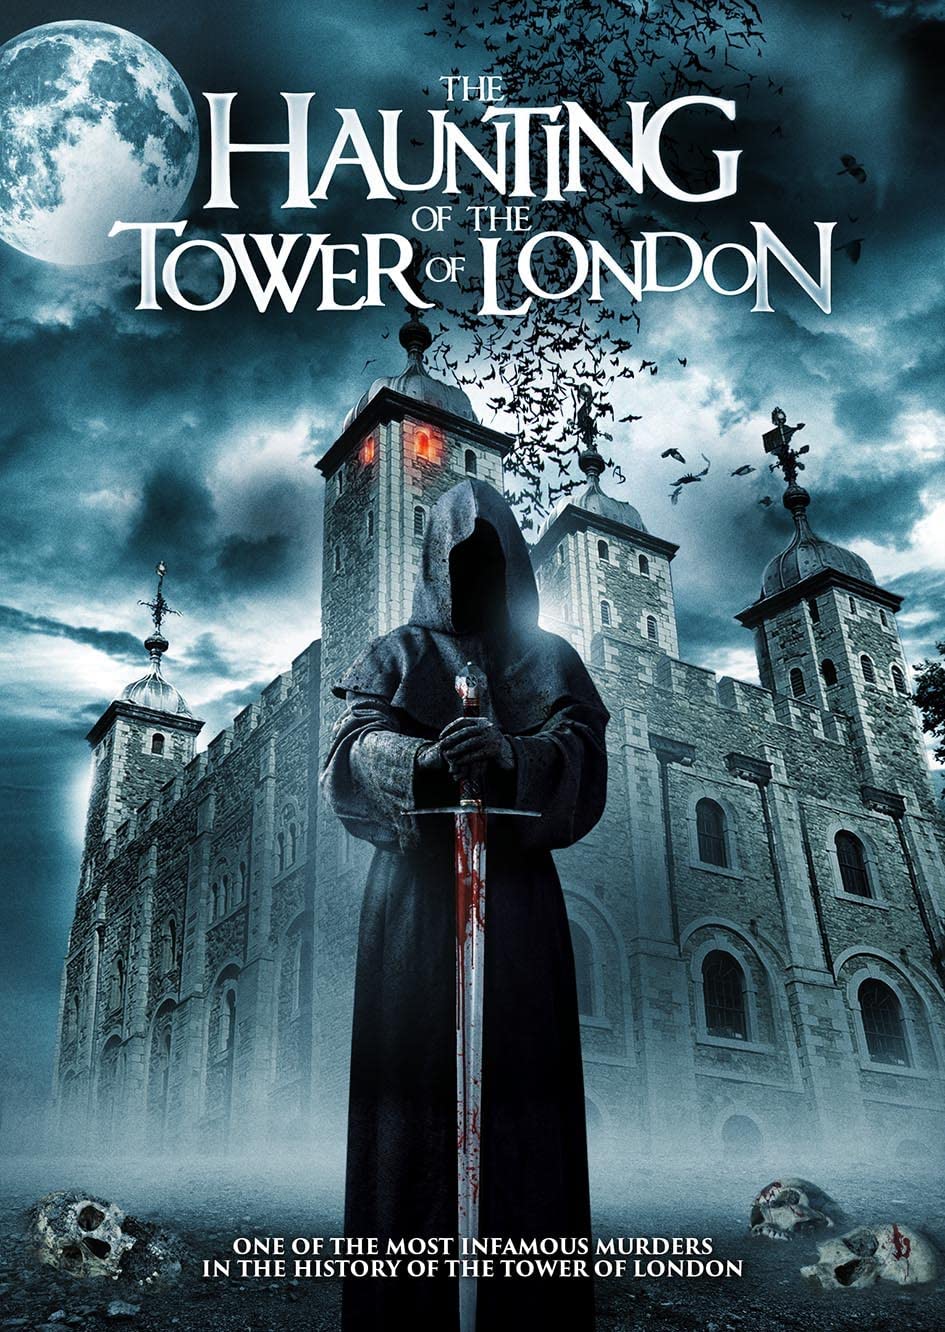 The Haunting of the Tower of London 2022 English 1080p HDRip 1.4GB Download